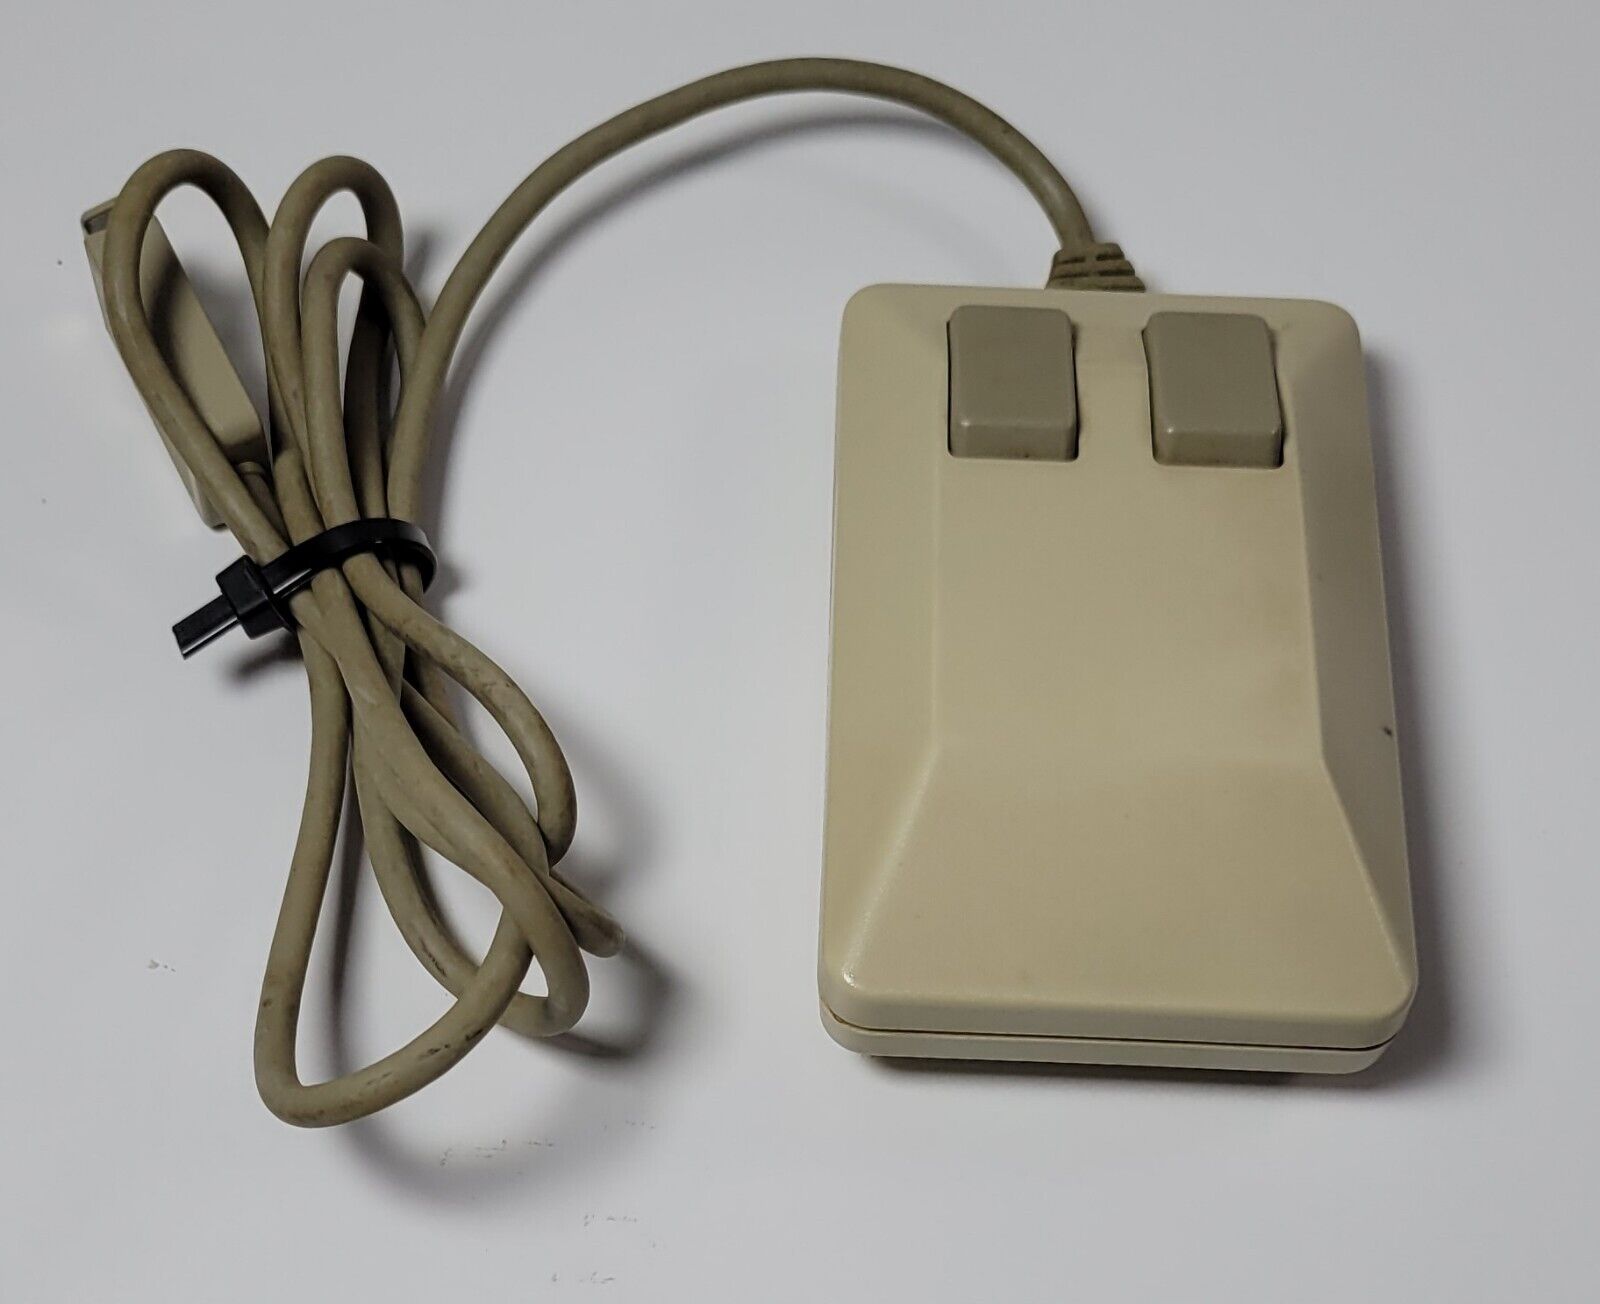 Commodore C64/C128 Mouse Two Button TM 481289